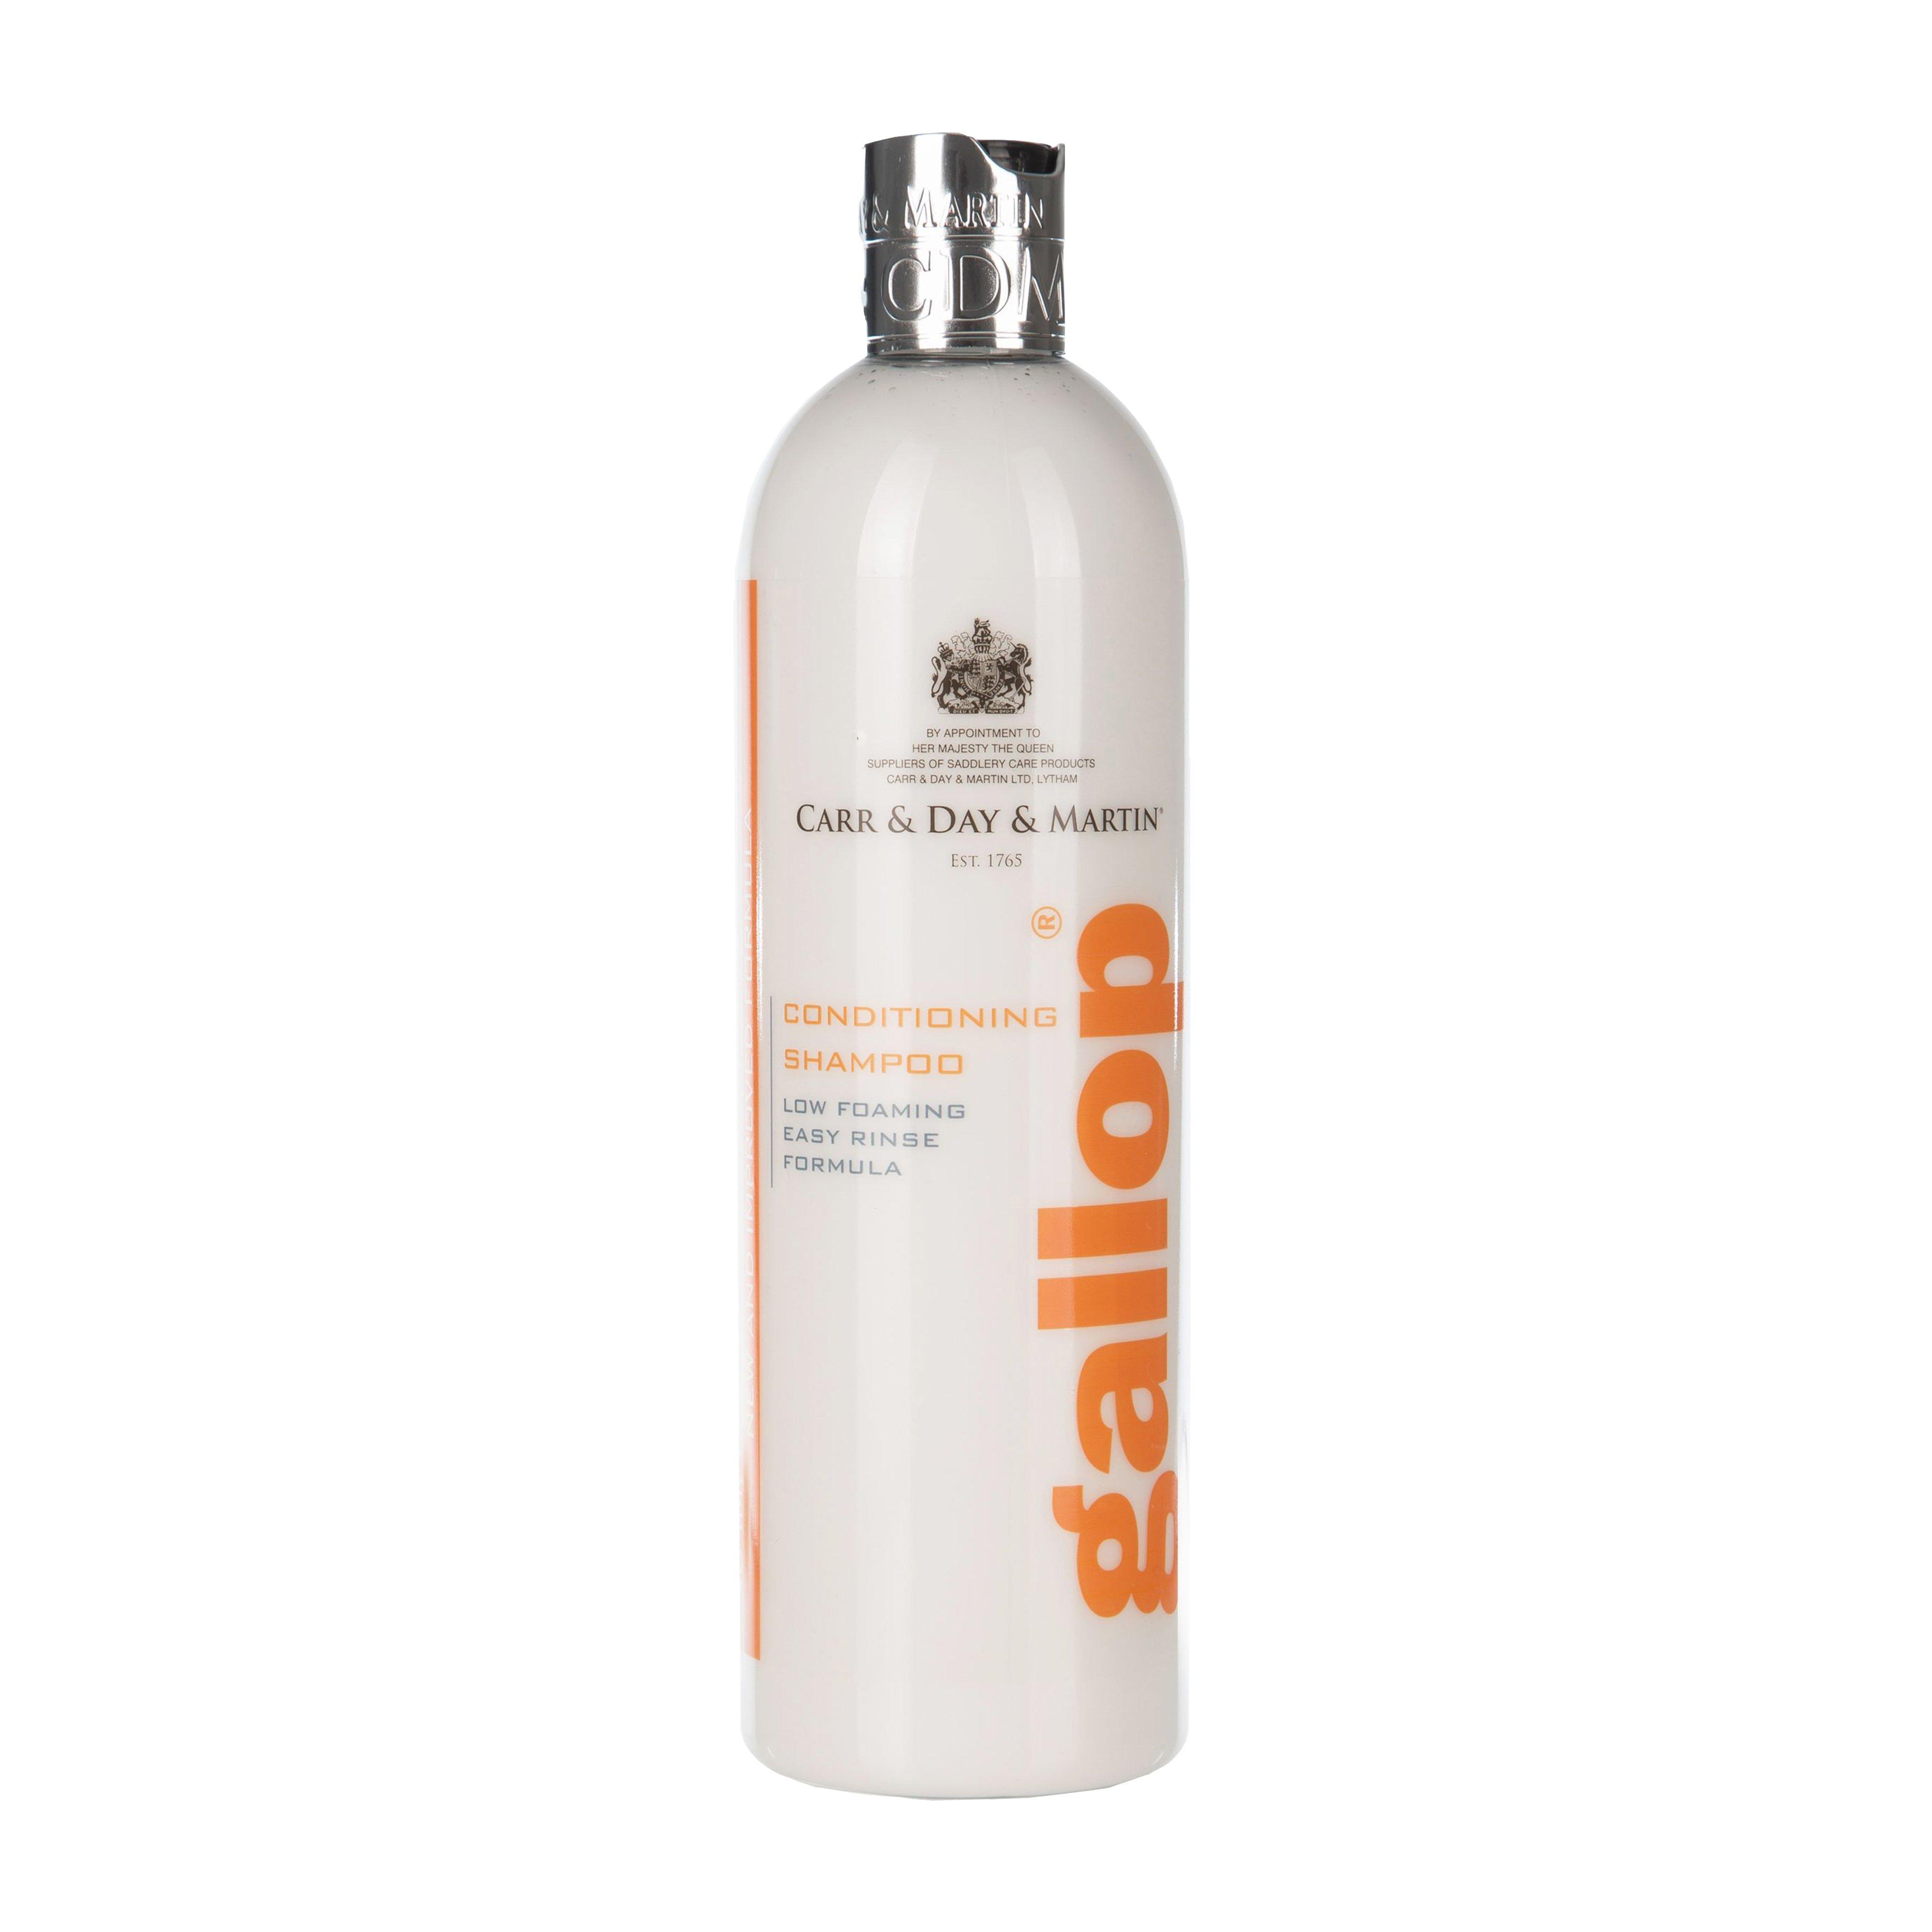 Carr and Day Gallop Conditioning Shampoo 500ml Review